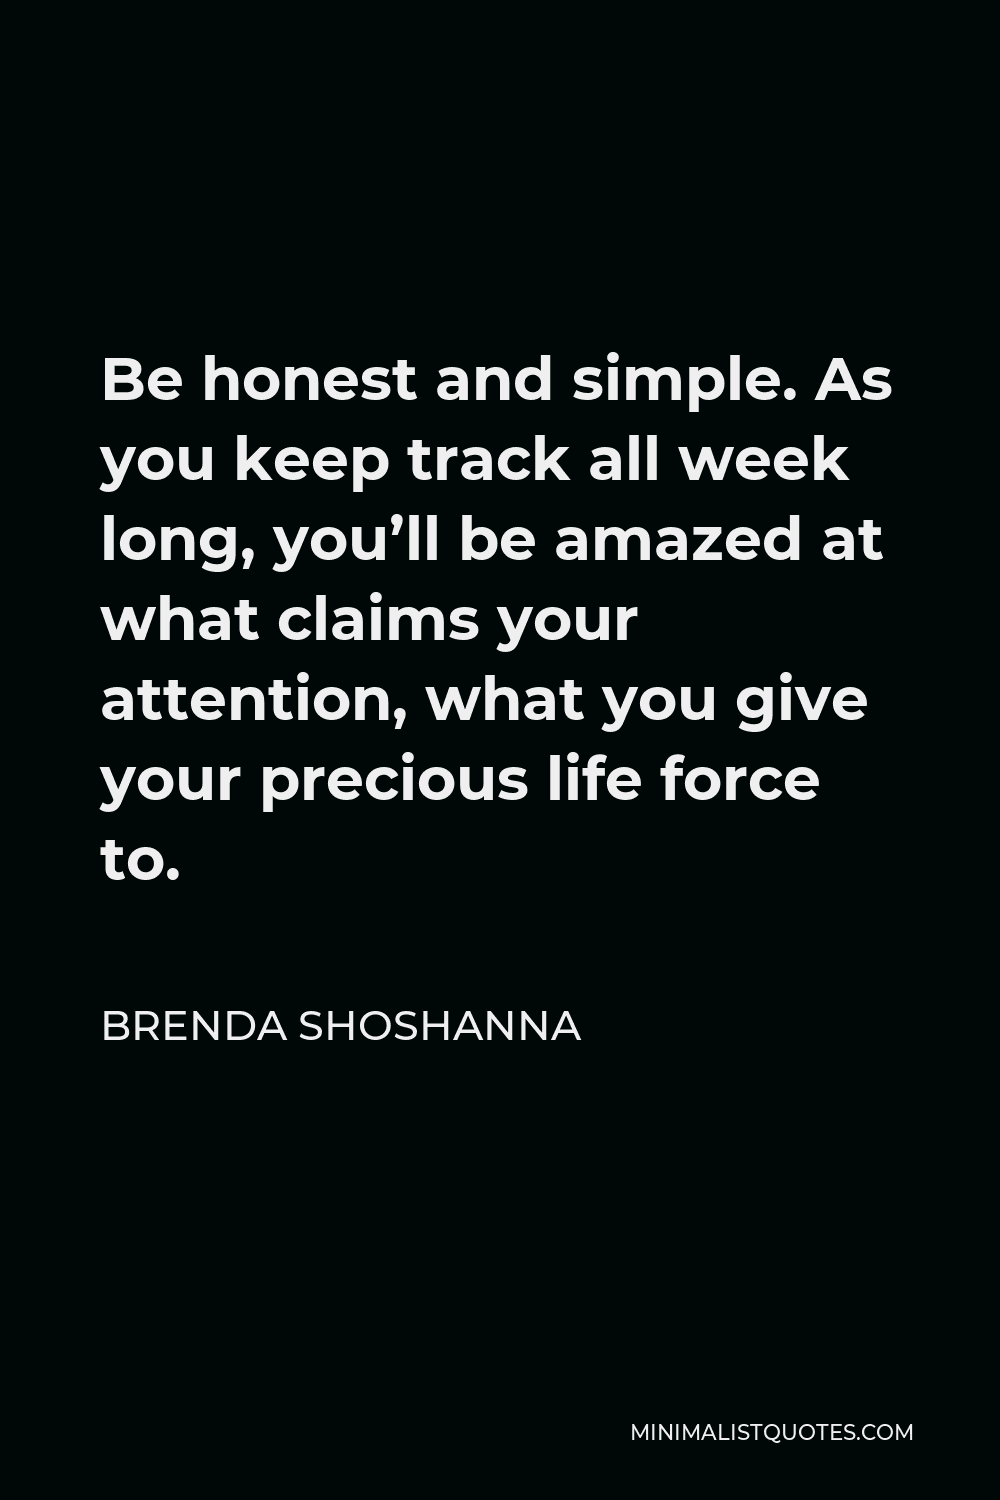 Brenda Shoshanna Quote - Be honest and simple. As you keep track all week long, you’ll be amazed at what claims your attention, what you give your precious life force to.